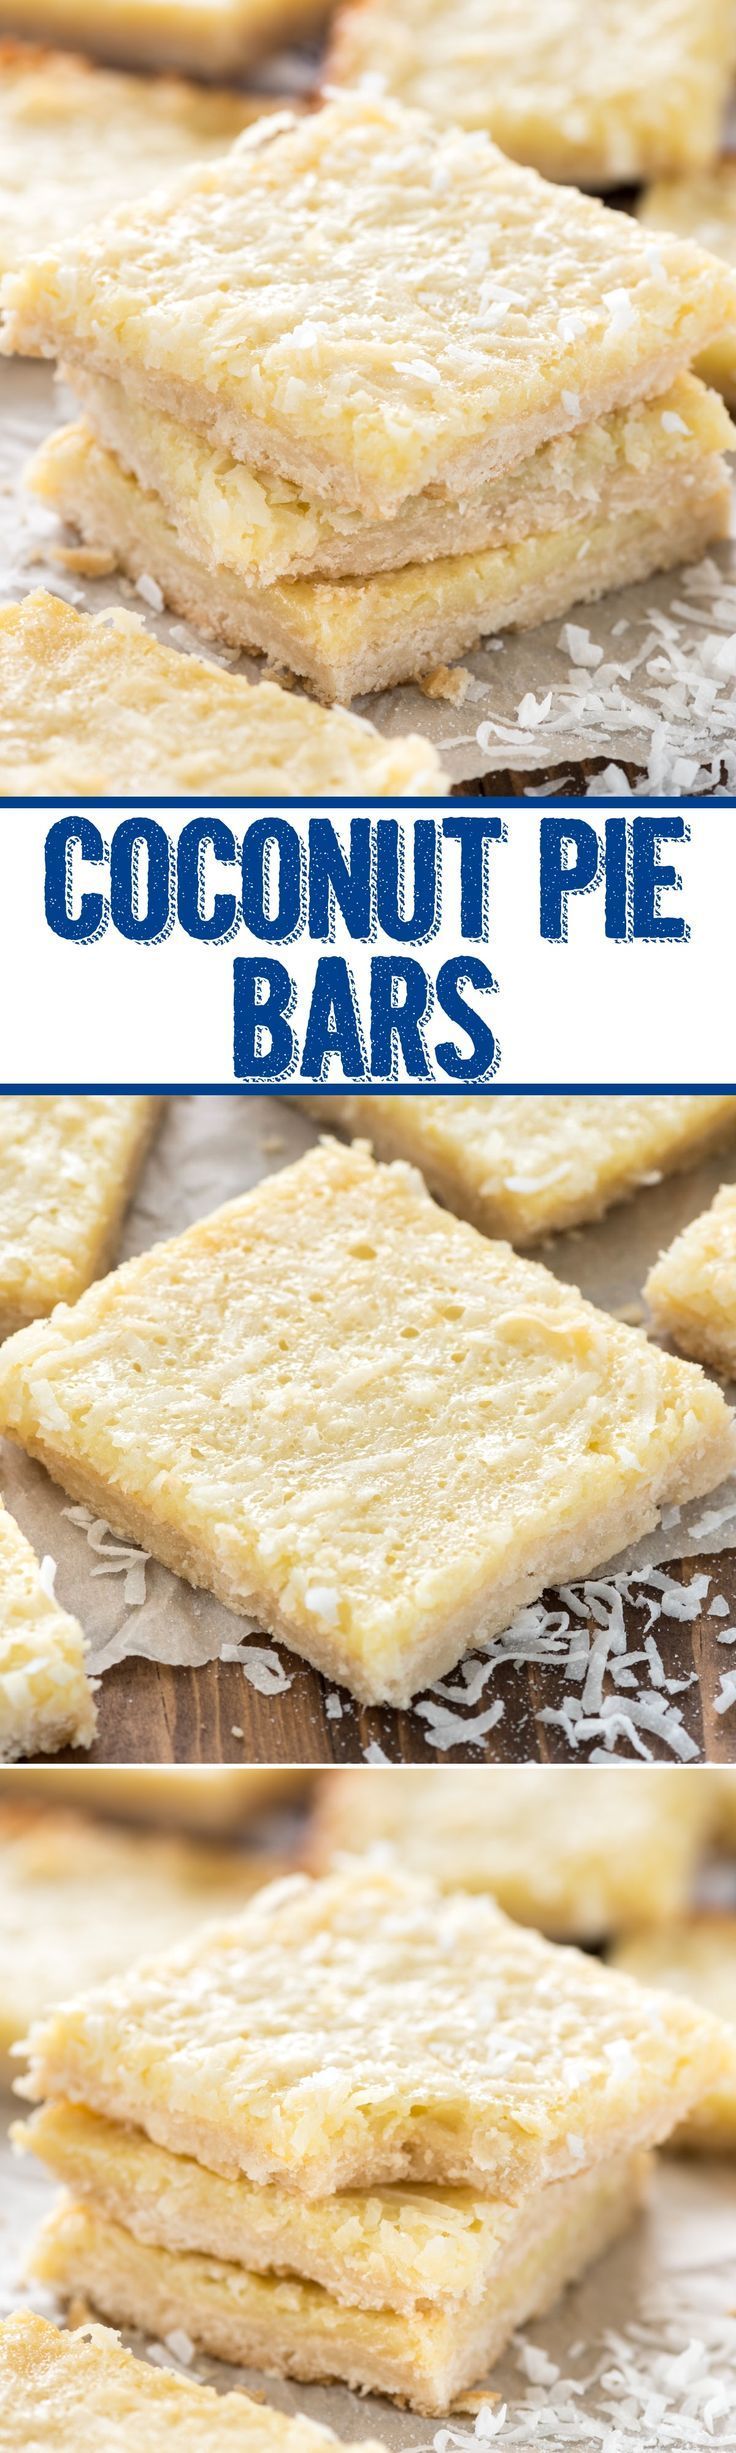 Gooey Coconut Pie Bars – this easy bar recipe has a shortbread crust topped with a